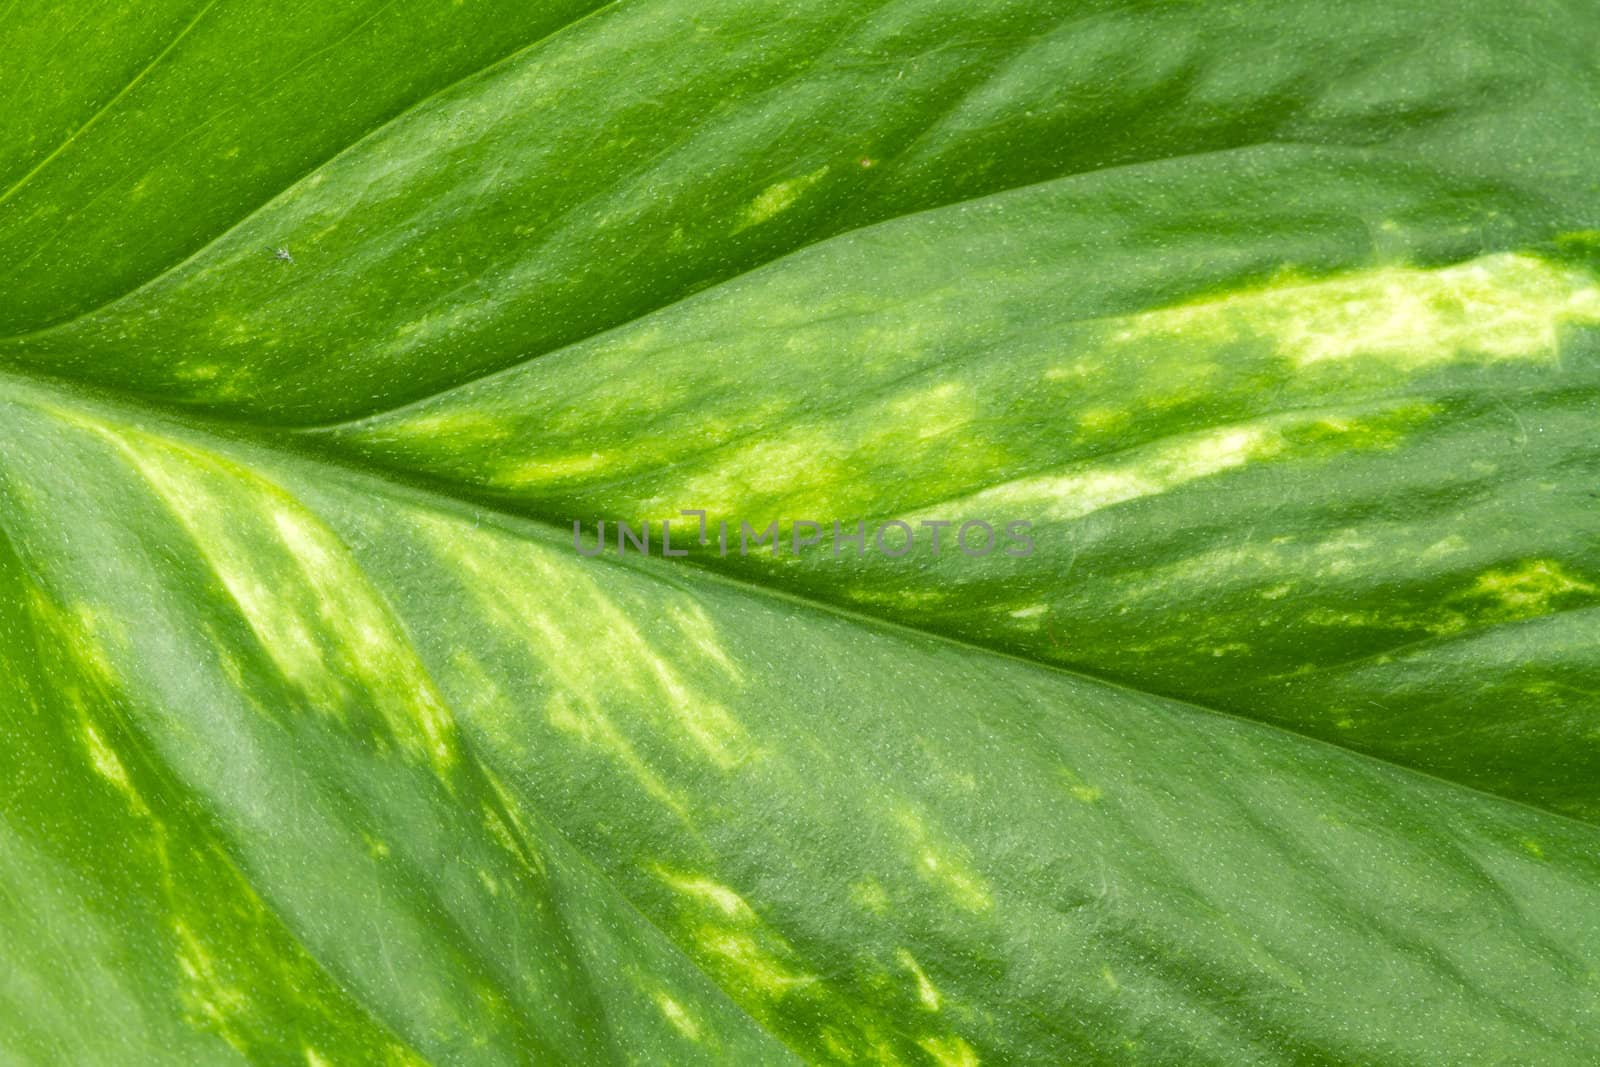 Texture of a green leaf as background 